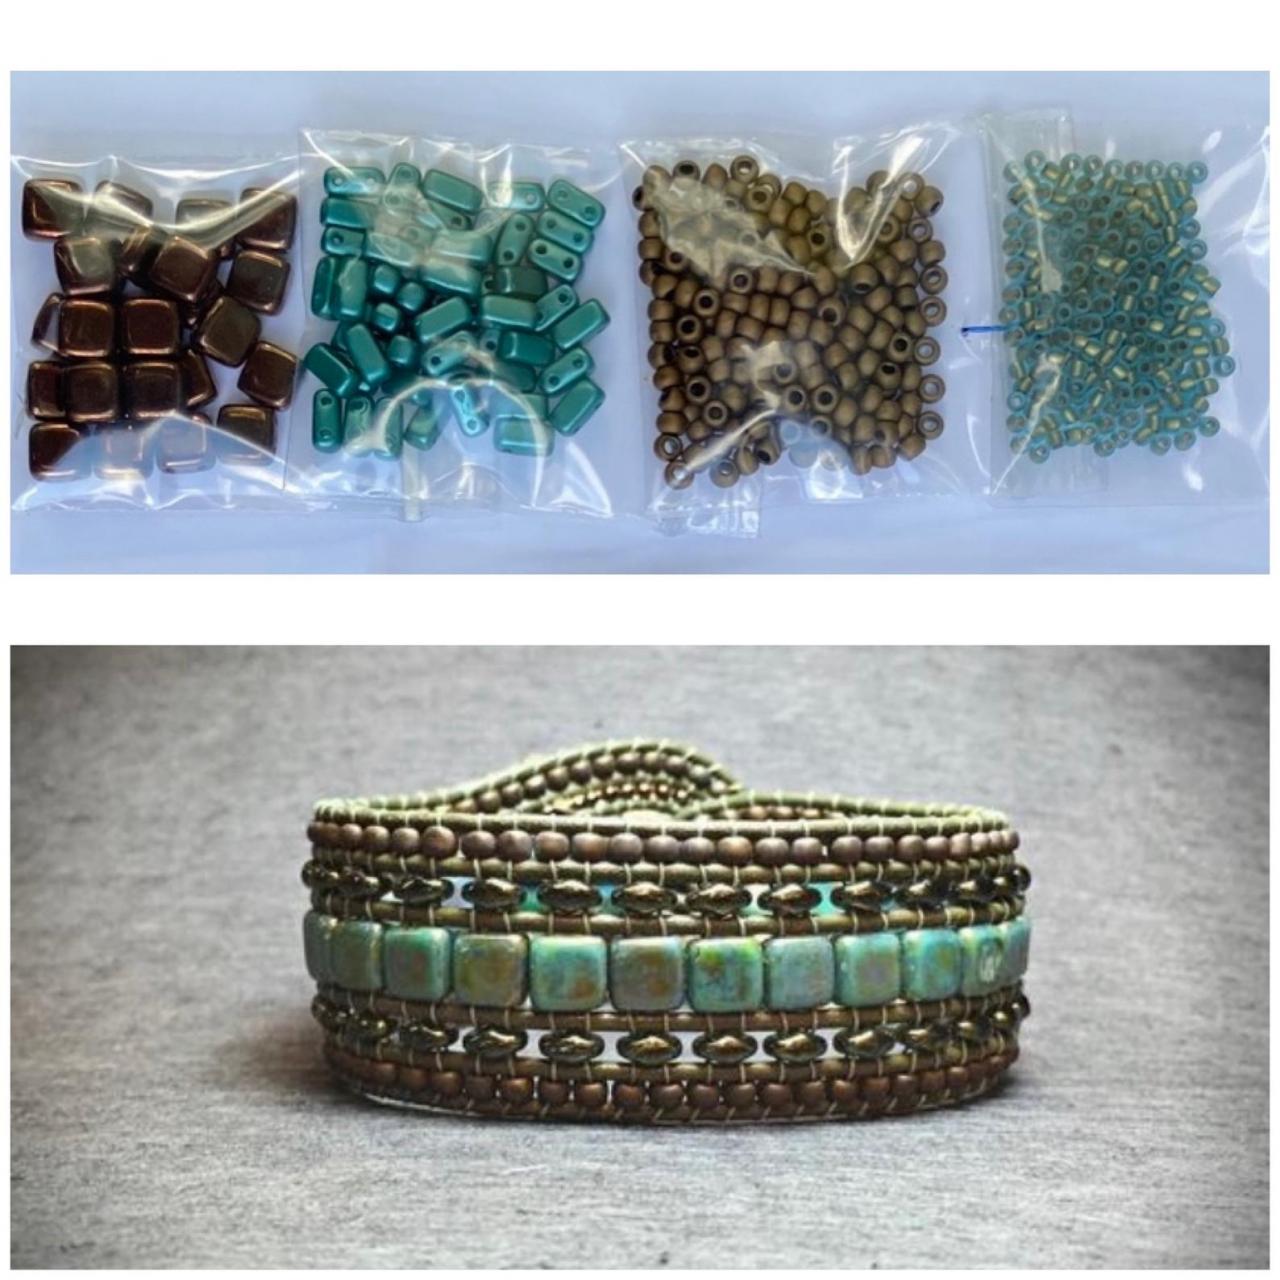 KIT Wide Leather Beaded Cuff Kit by Leila Martin Bonny Bohemian Teal Brown Bronze DIY Intermediate Instructions Complete NO Tools #6